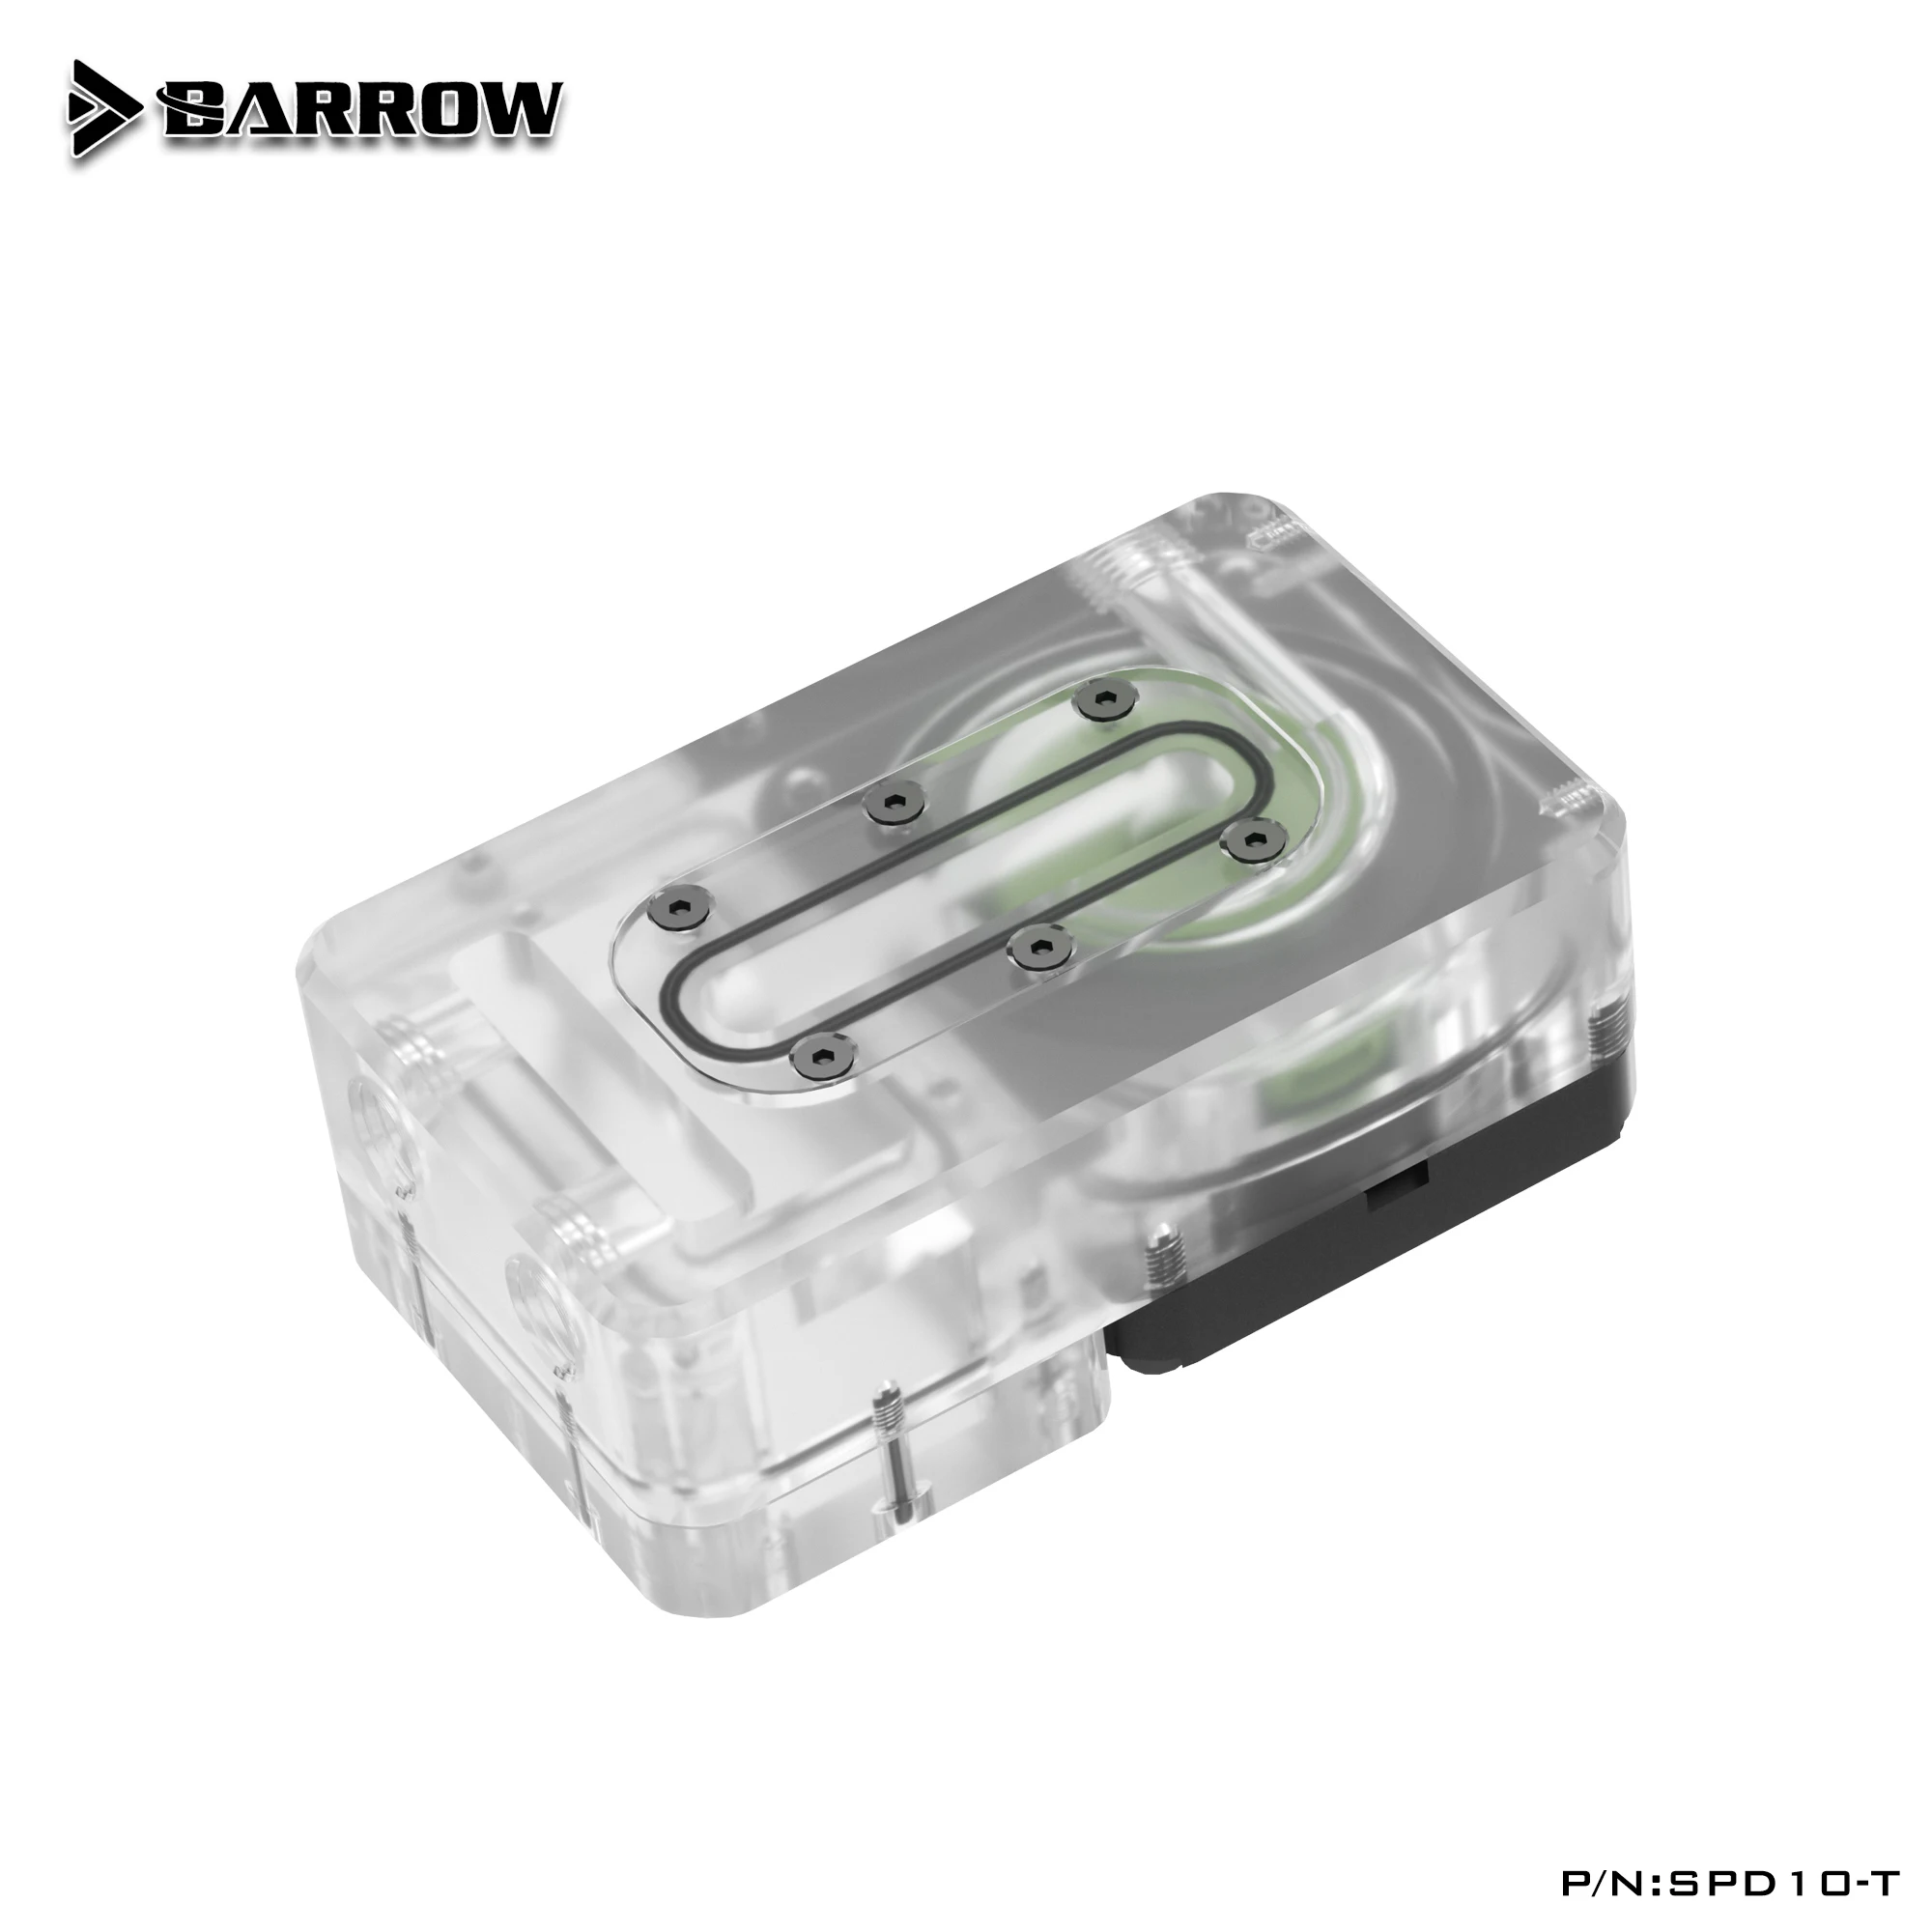 Barrow SPD10-T DC12V 10W PWM Water Cooler Integrated Pump Water Tank For ITX Case Water Cooling System MINI Reservoir